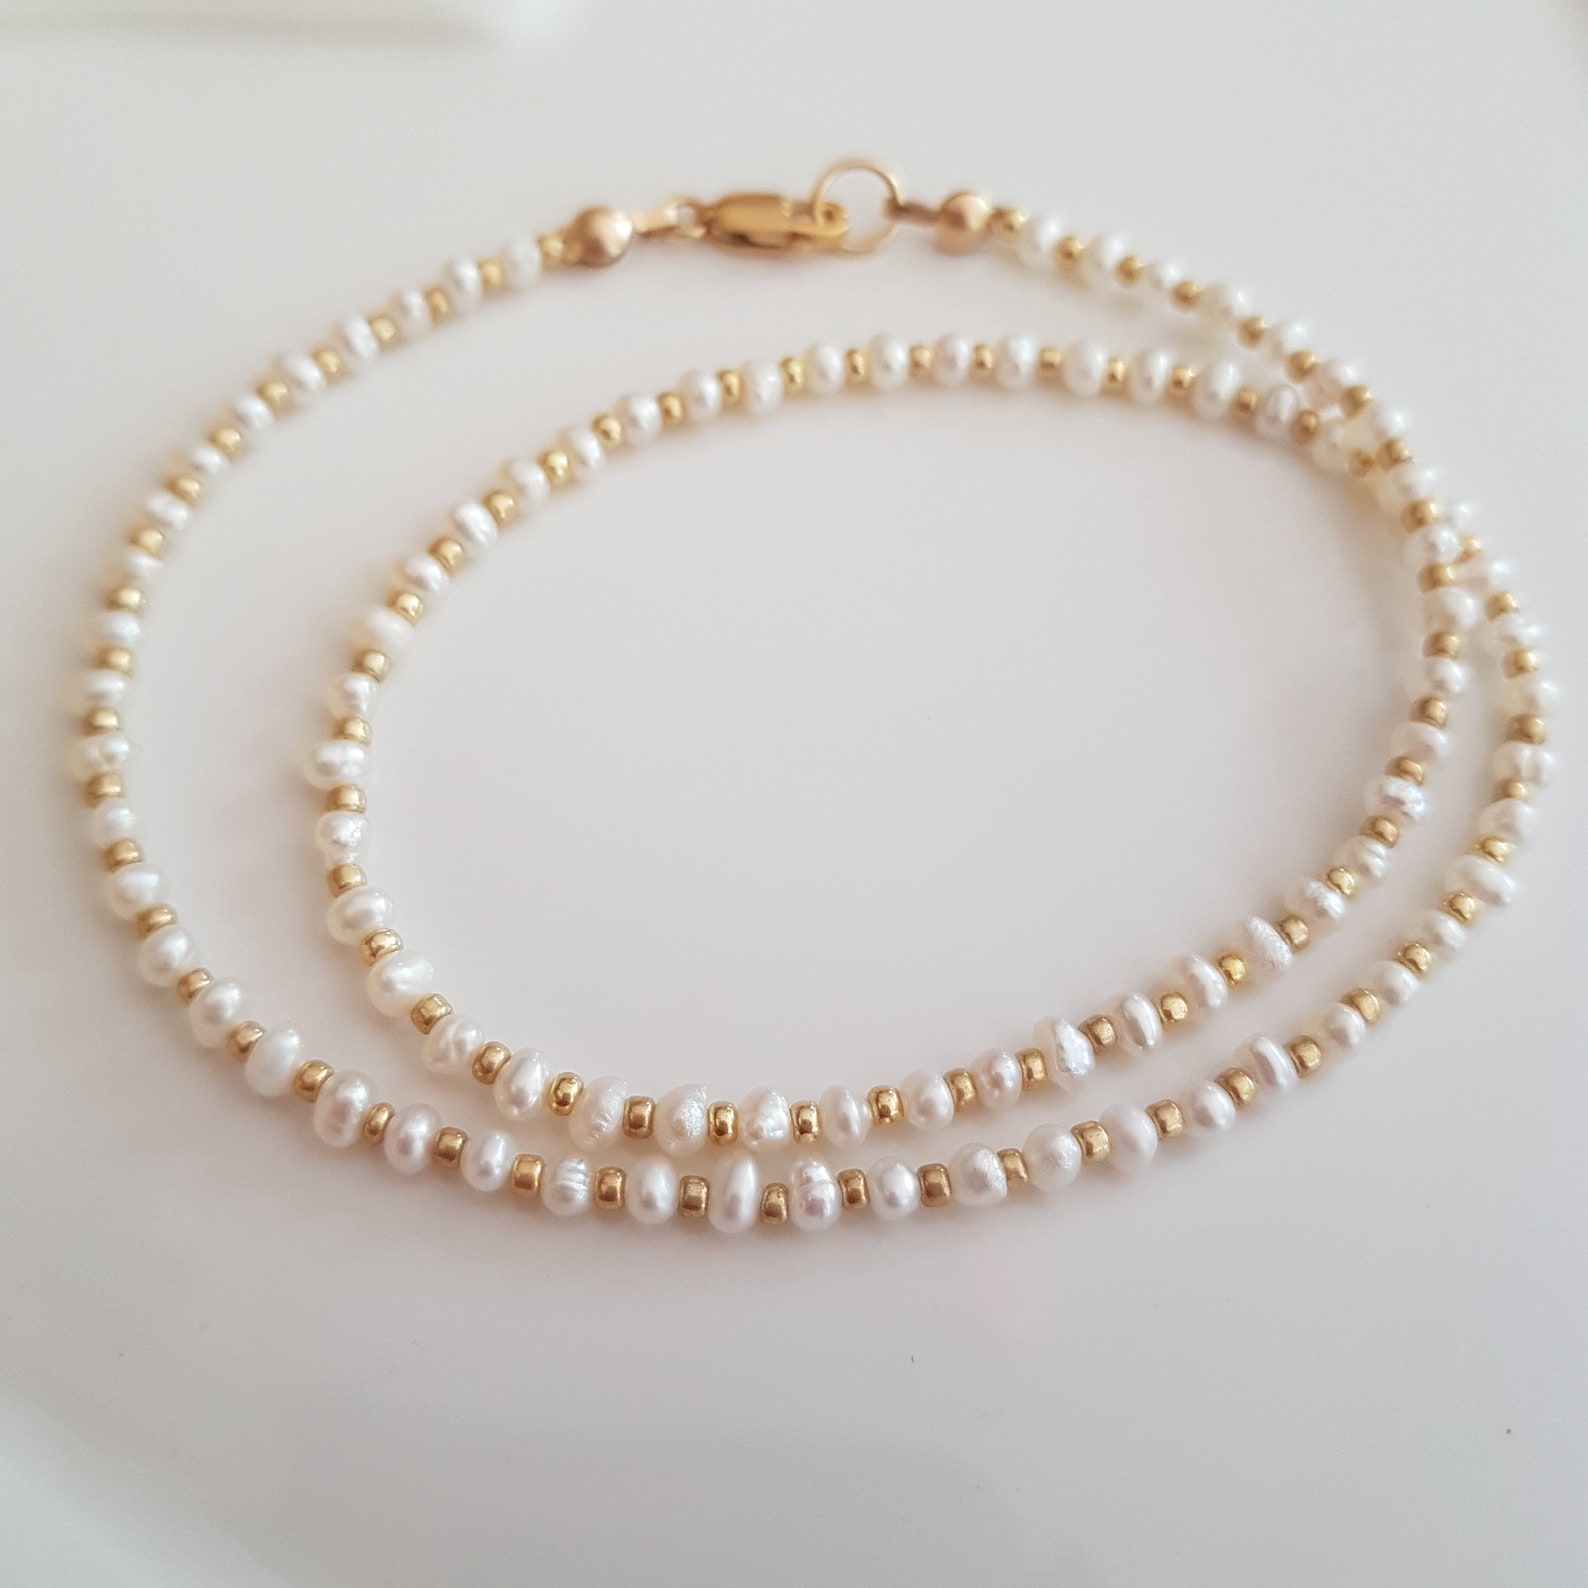 Tiny Freshwater Pearl Necklace Choker K Gold Fill Or Etsy Uk